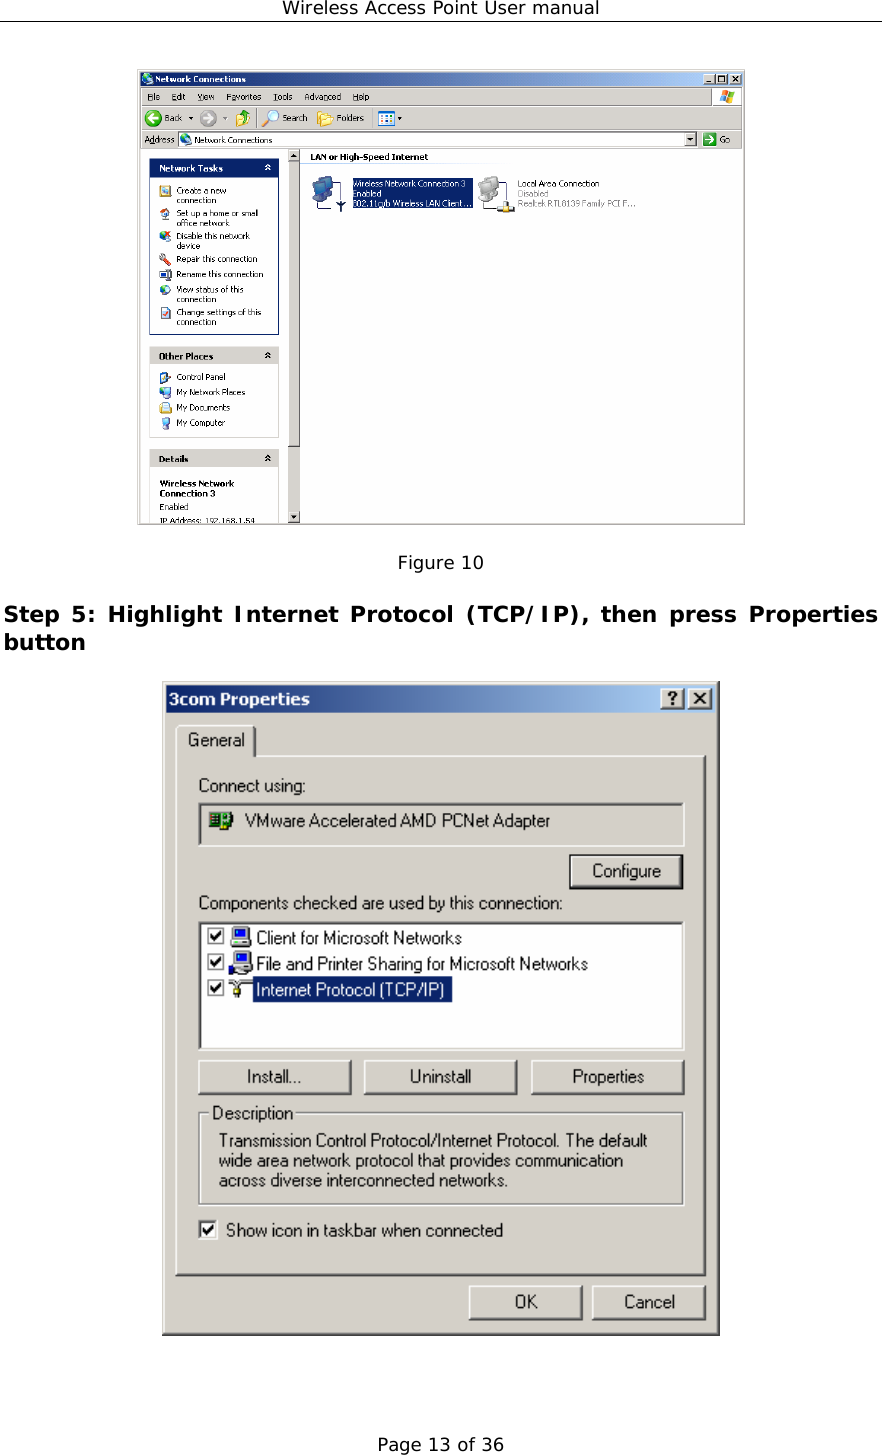 Wireless Access Point User manual Page 13 of 36   Figure 10  Step 5: Highlight Internet Protocol (TCP/IP), then press Properties button     